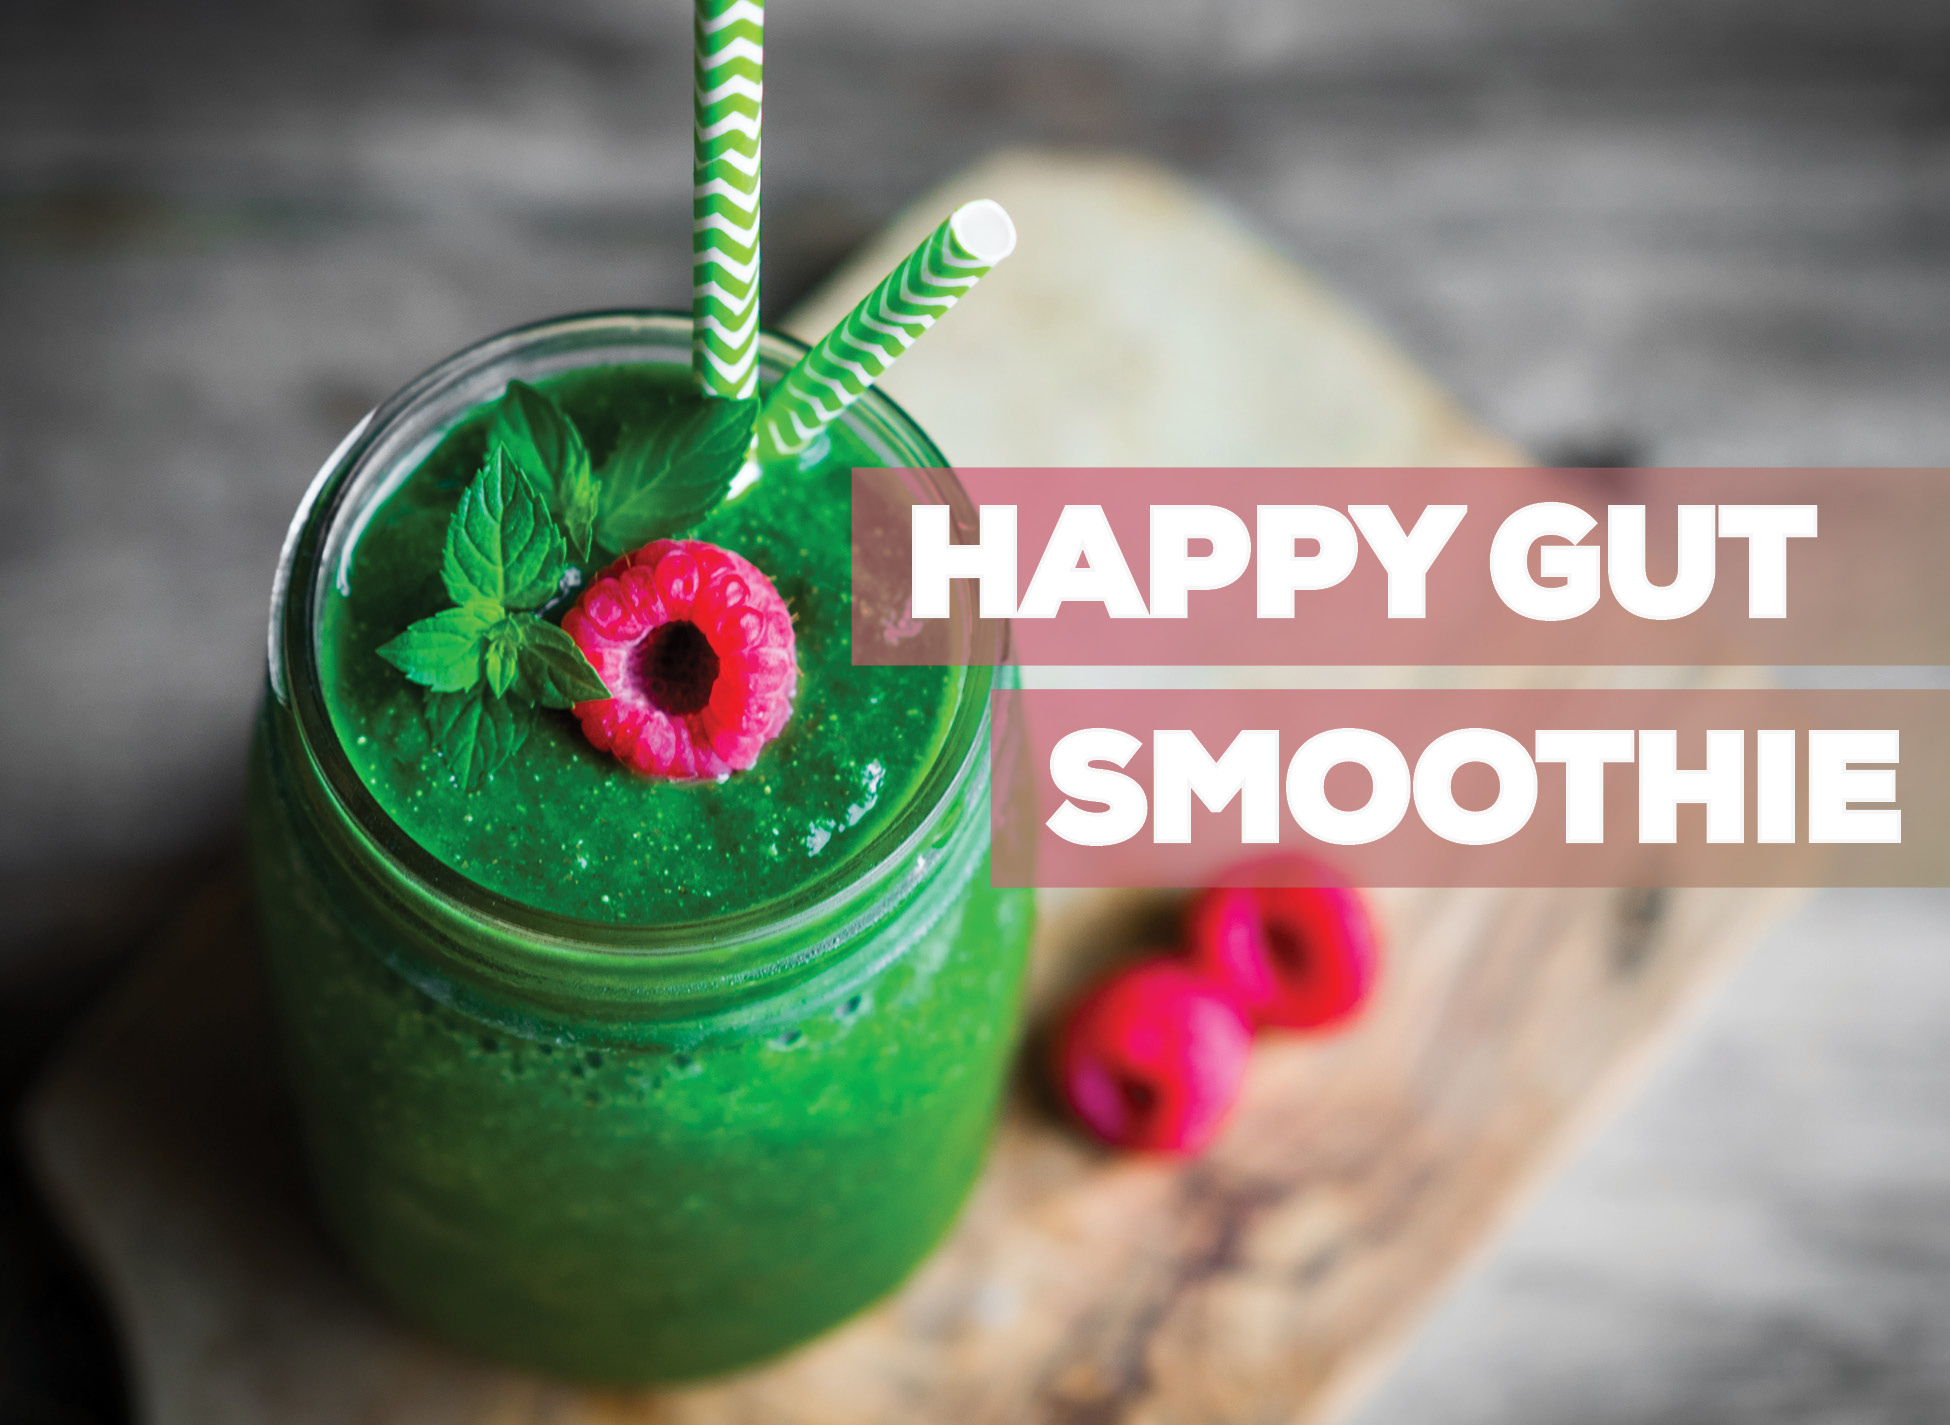 Happy gut smoothie recipe - Lily of the Desert